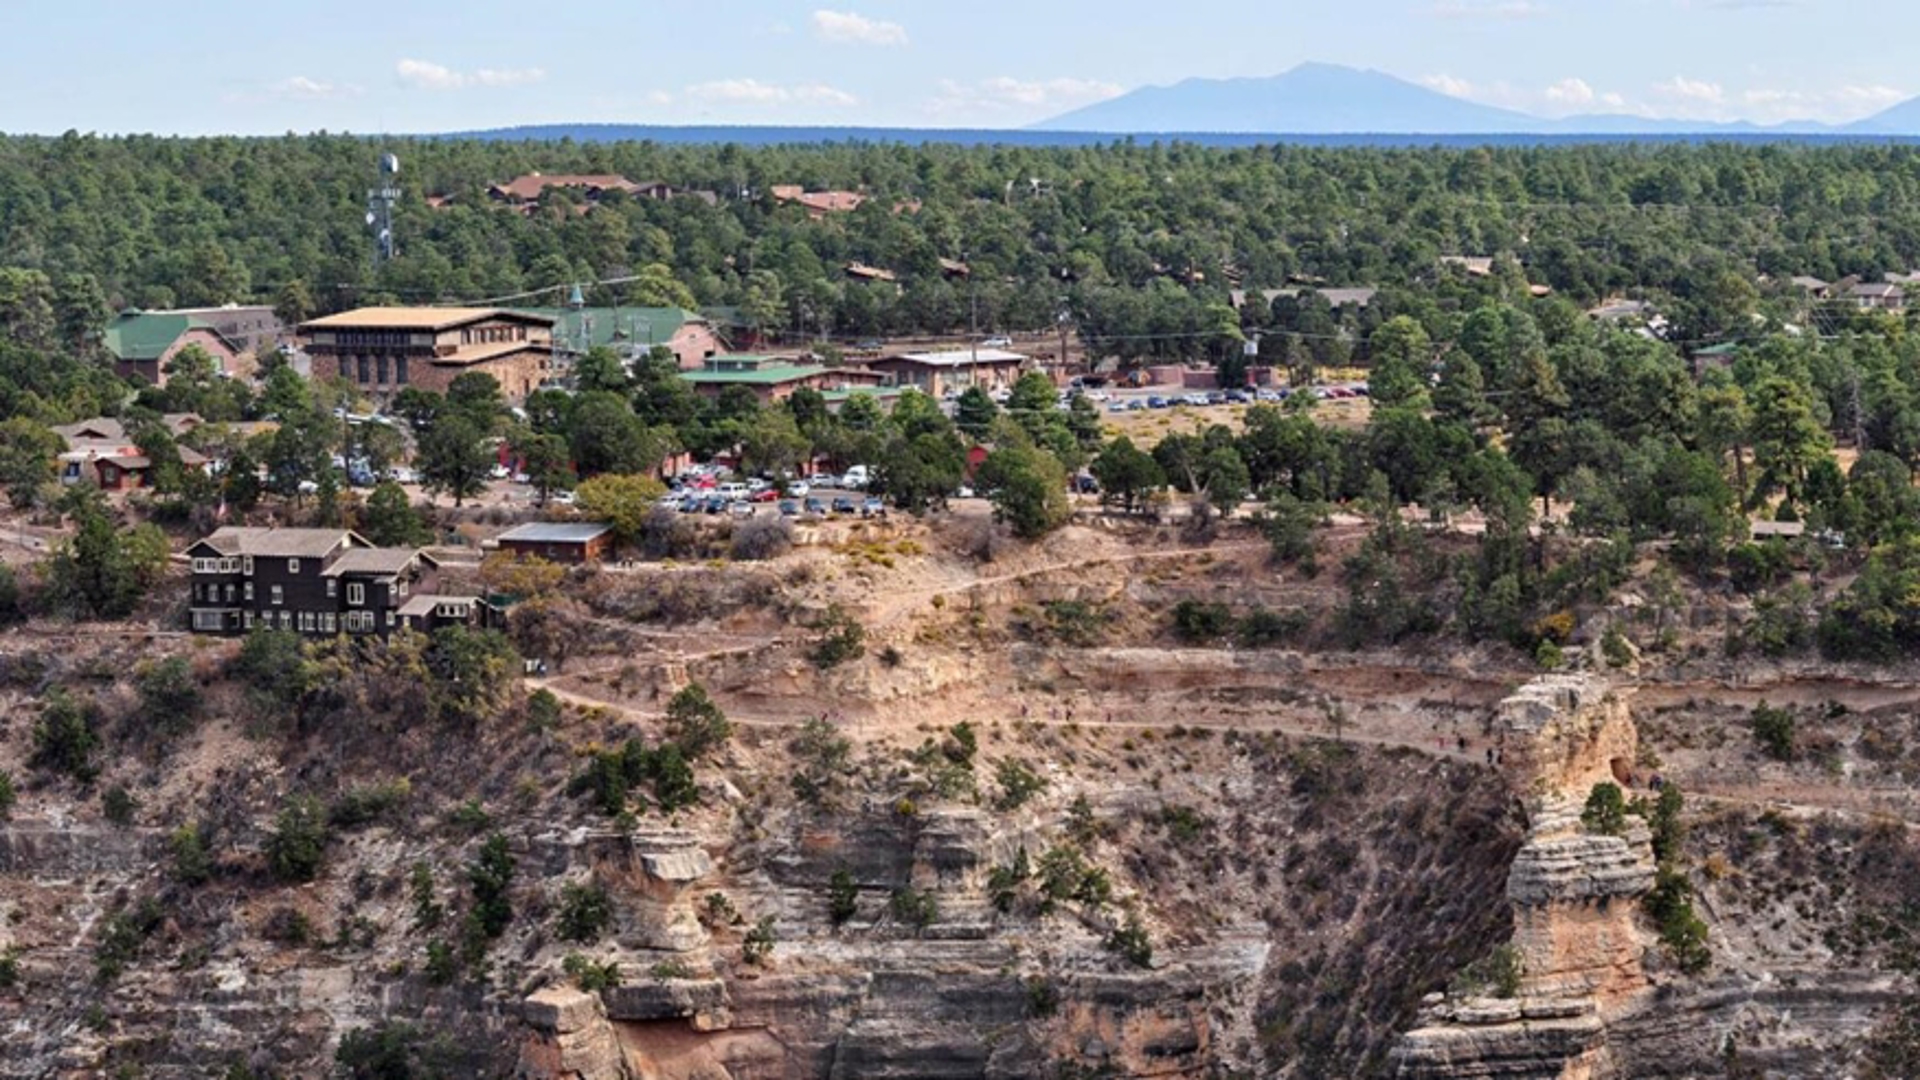 The hiker from San Angelo, Texas, collapsed and died near the rim, according to officials.